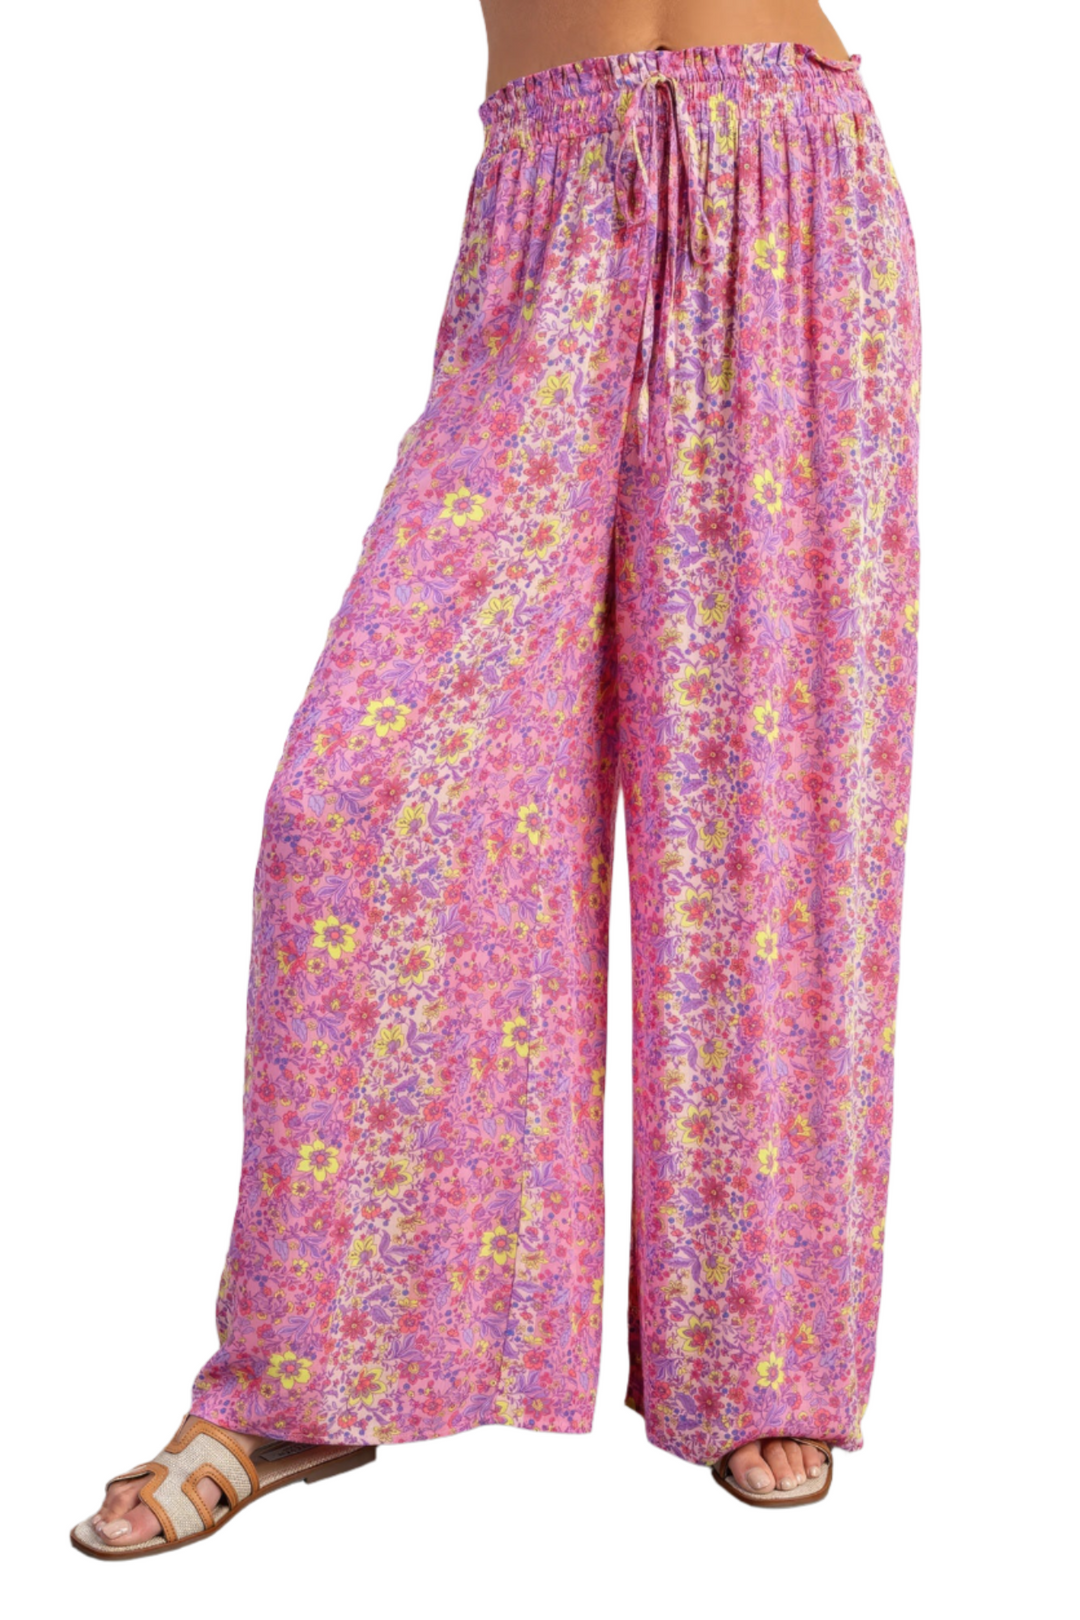 Floral Print Gauze Palazzo Pants with Smocked Waist and Adjustable Tie